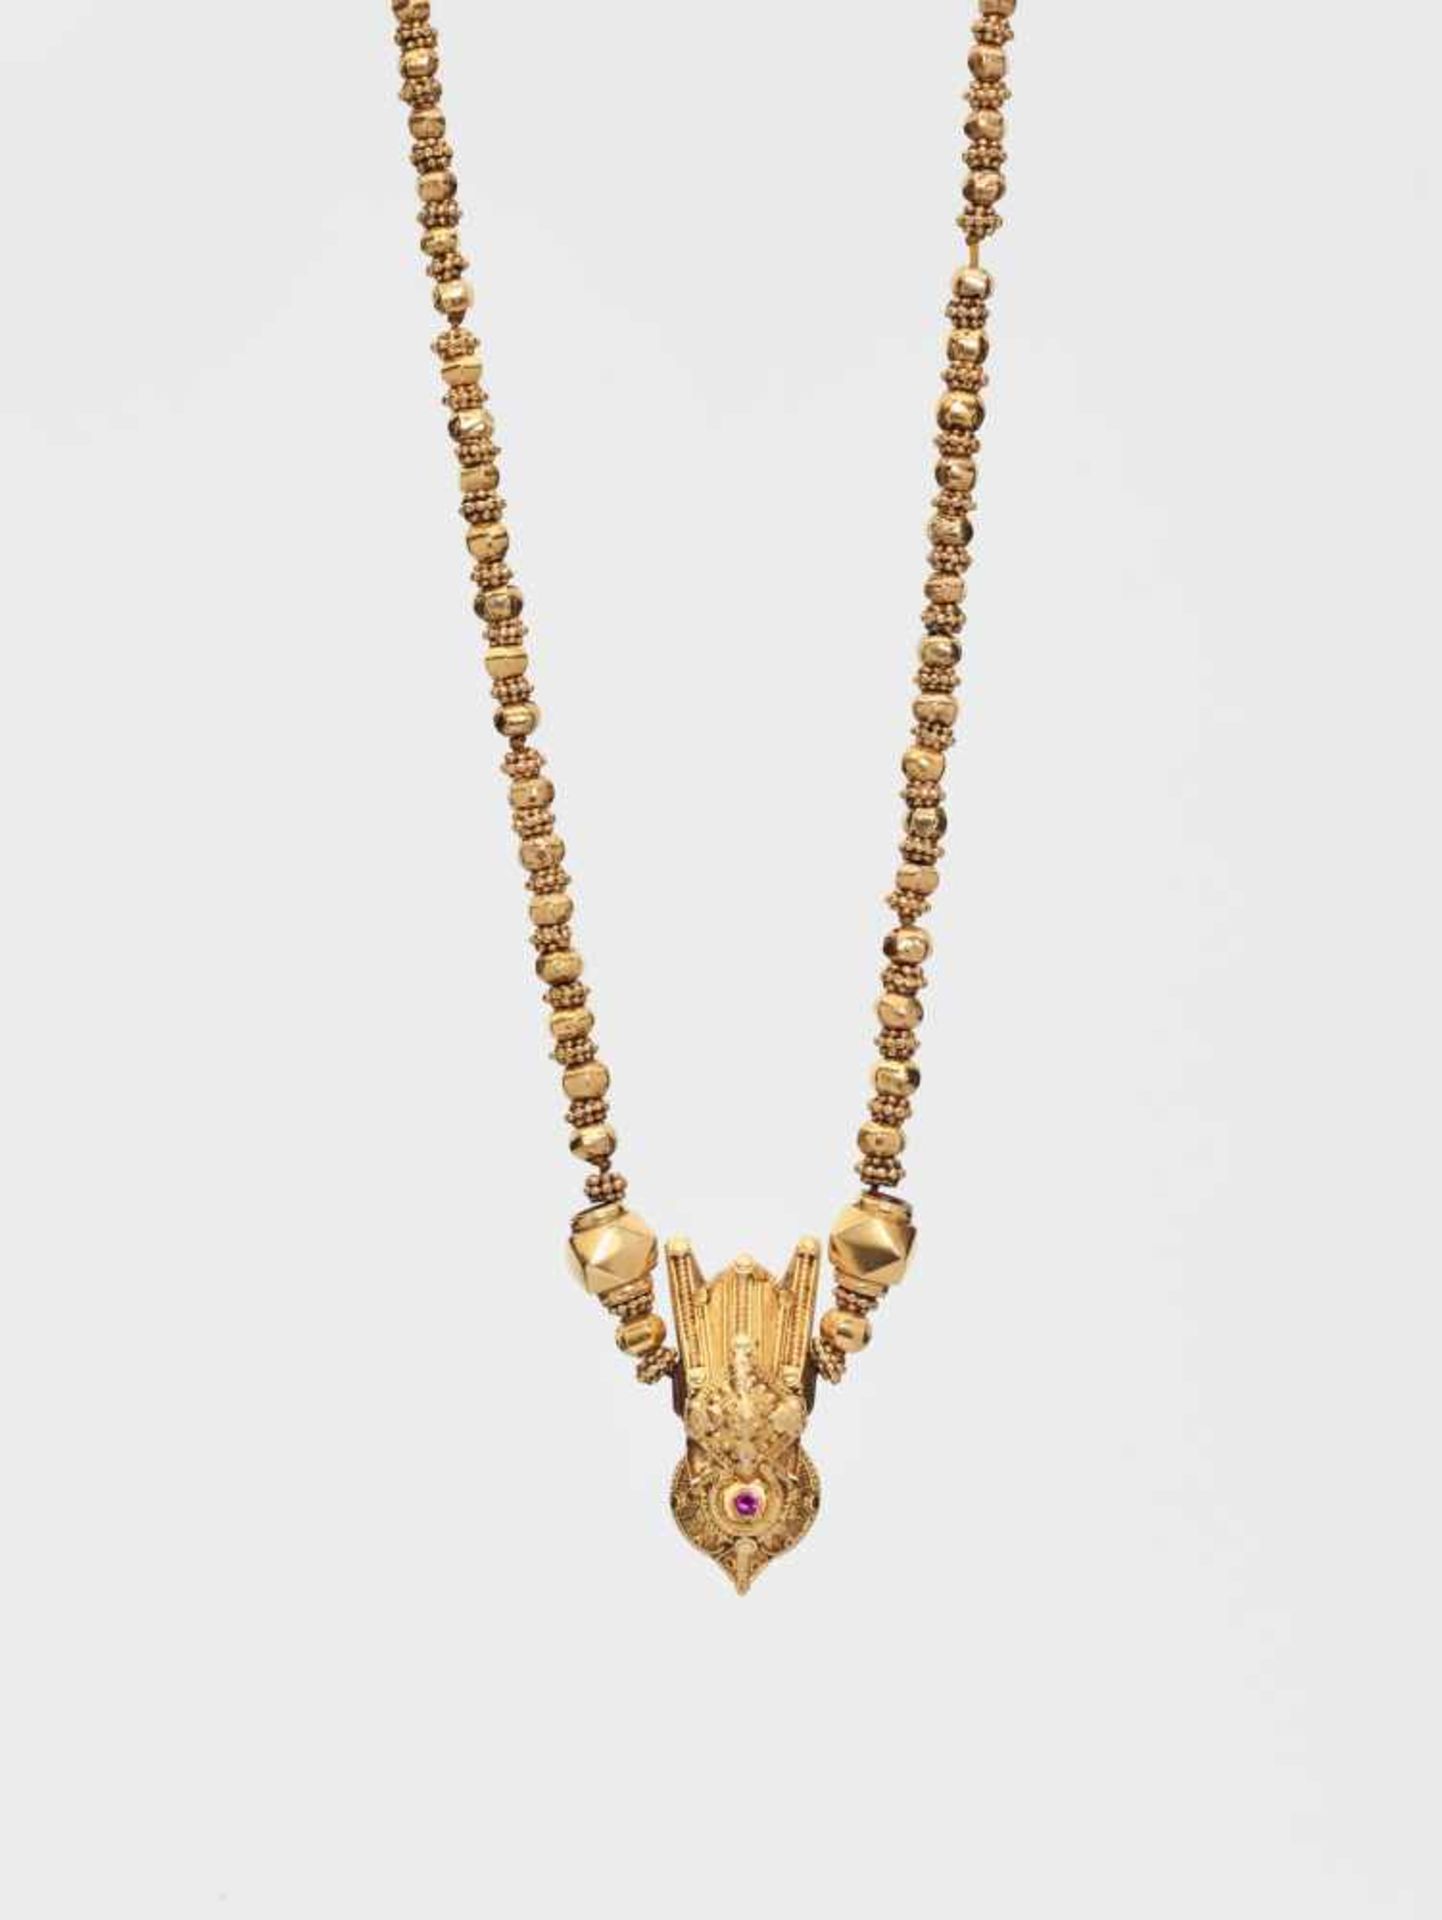 A 19th CENTURY INDIAN MANGALA SUTRA WEDDING NECKLACE India / Tamil Nadu19th centuryThe chain is made - Image 6 of 7